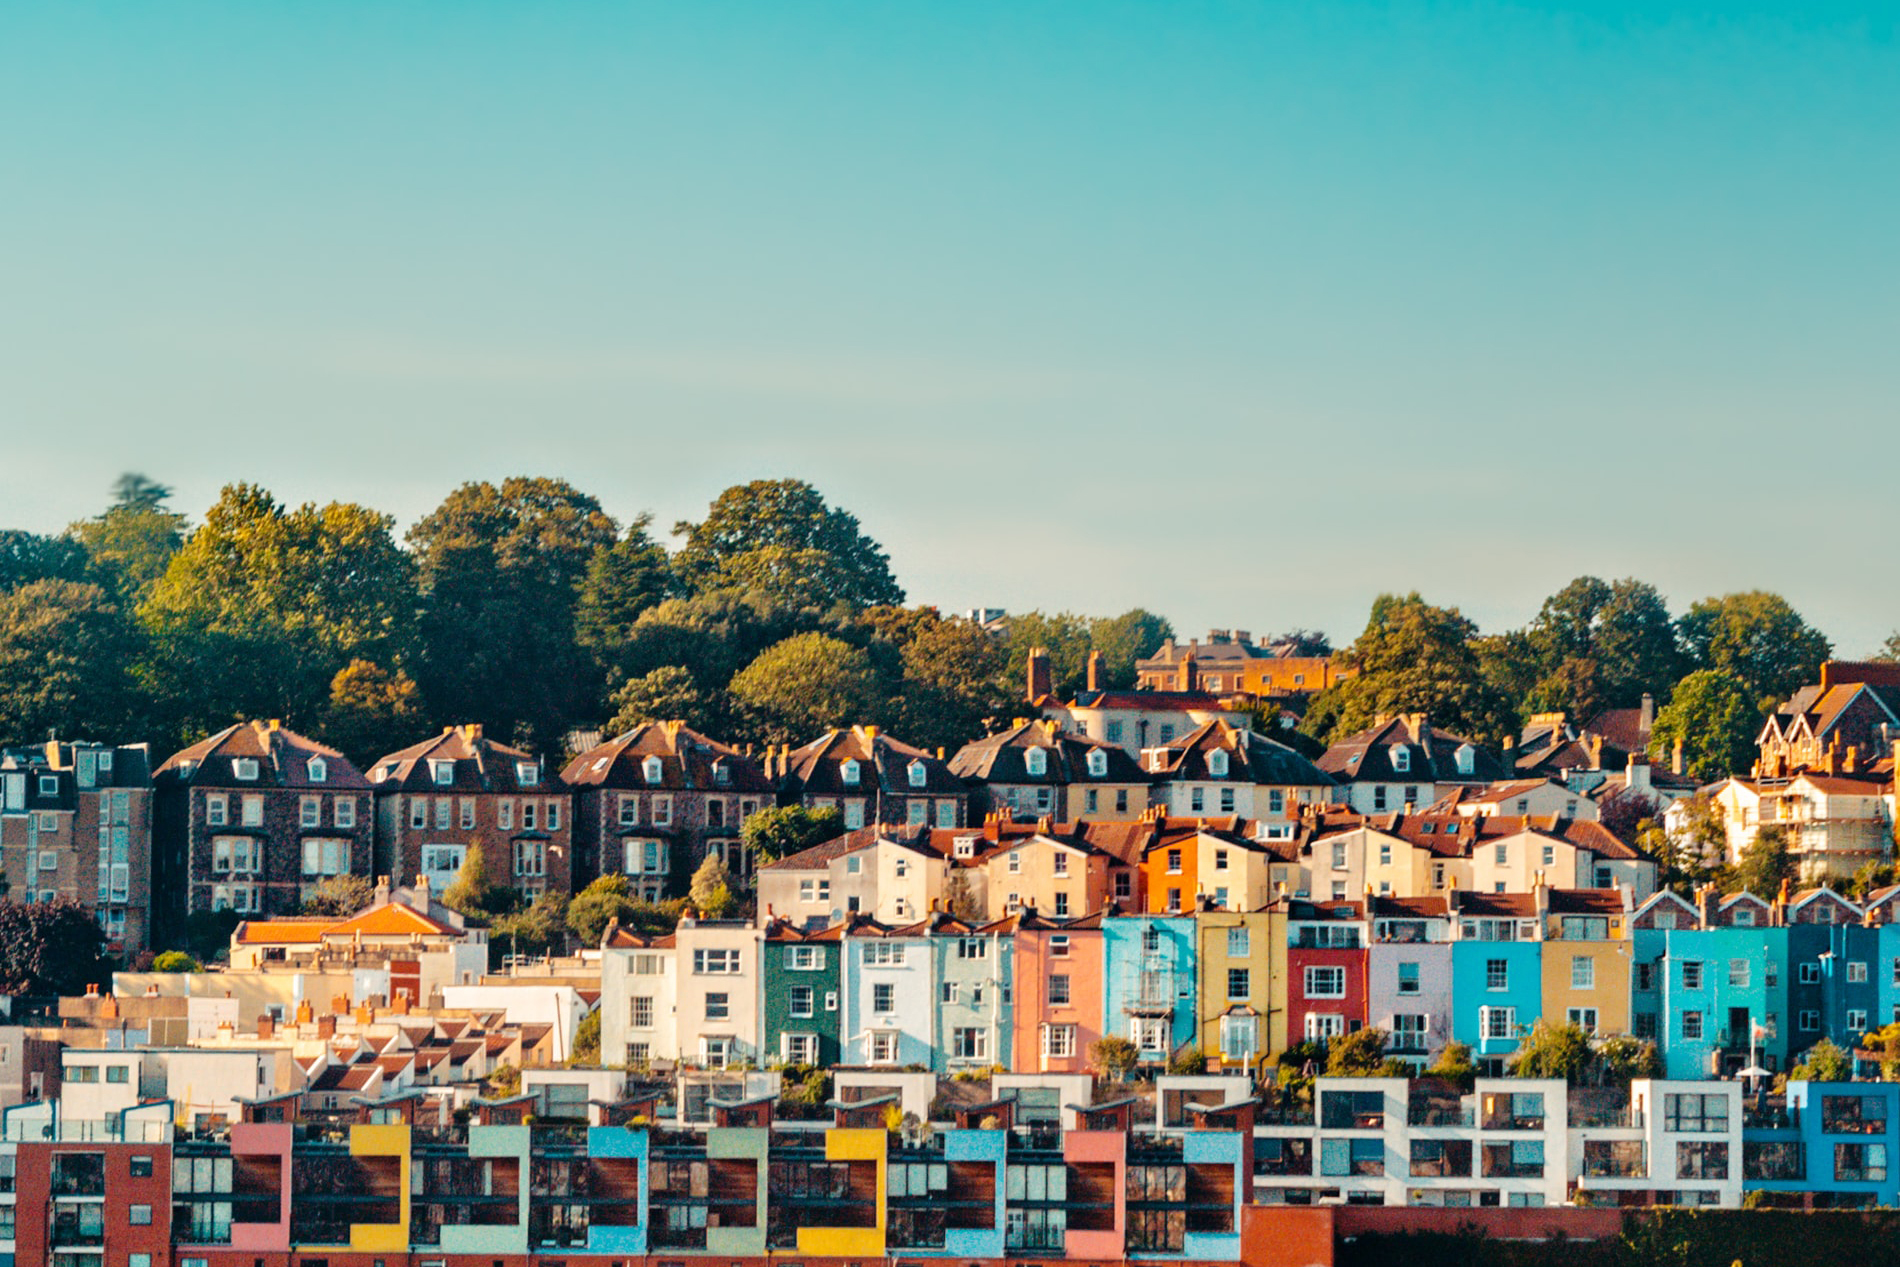 10-best-places-to-live-in-bristol-according-to-residents